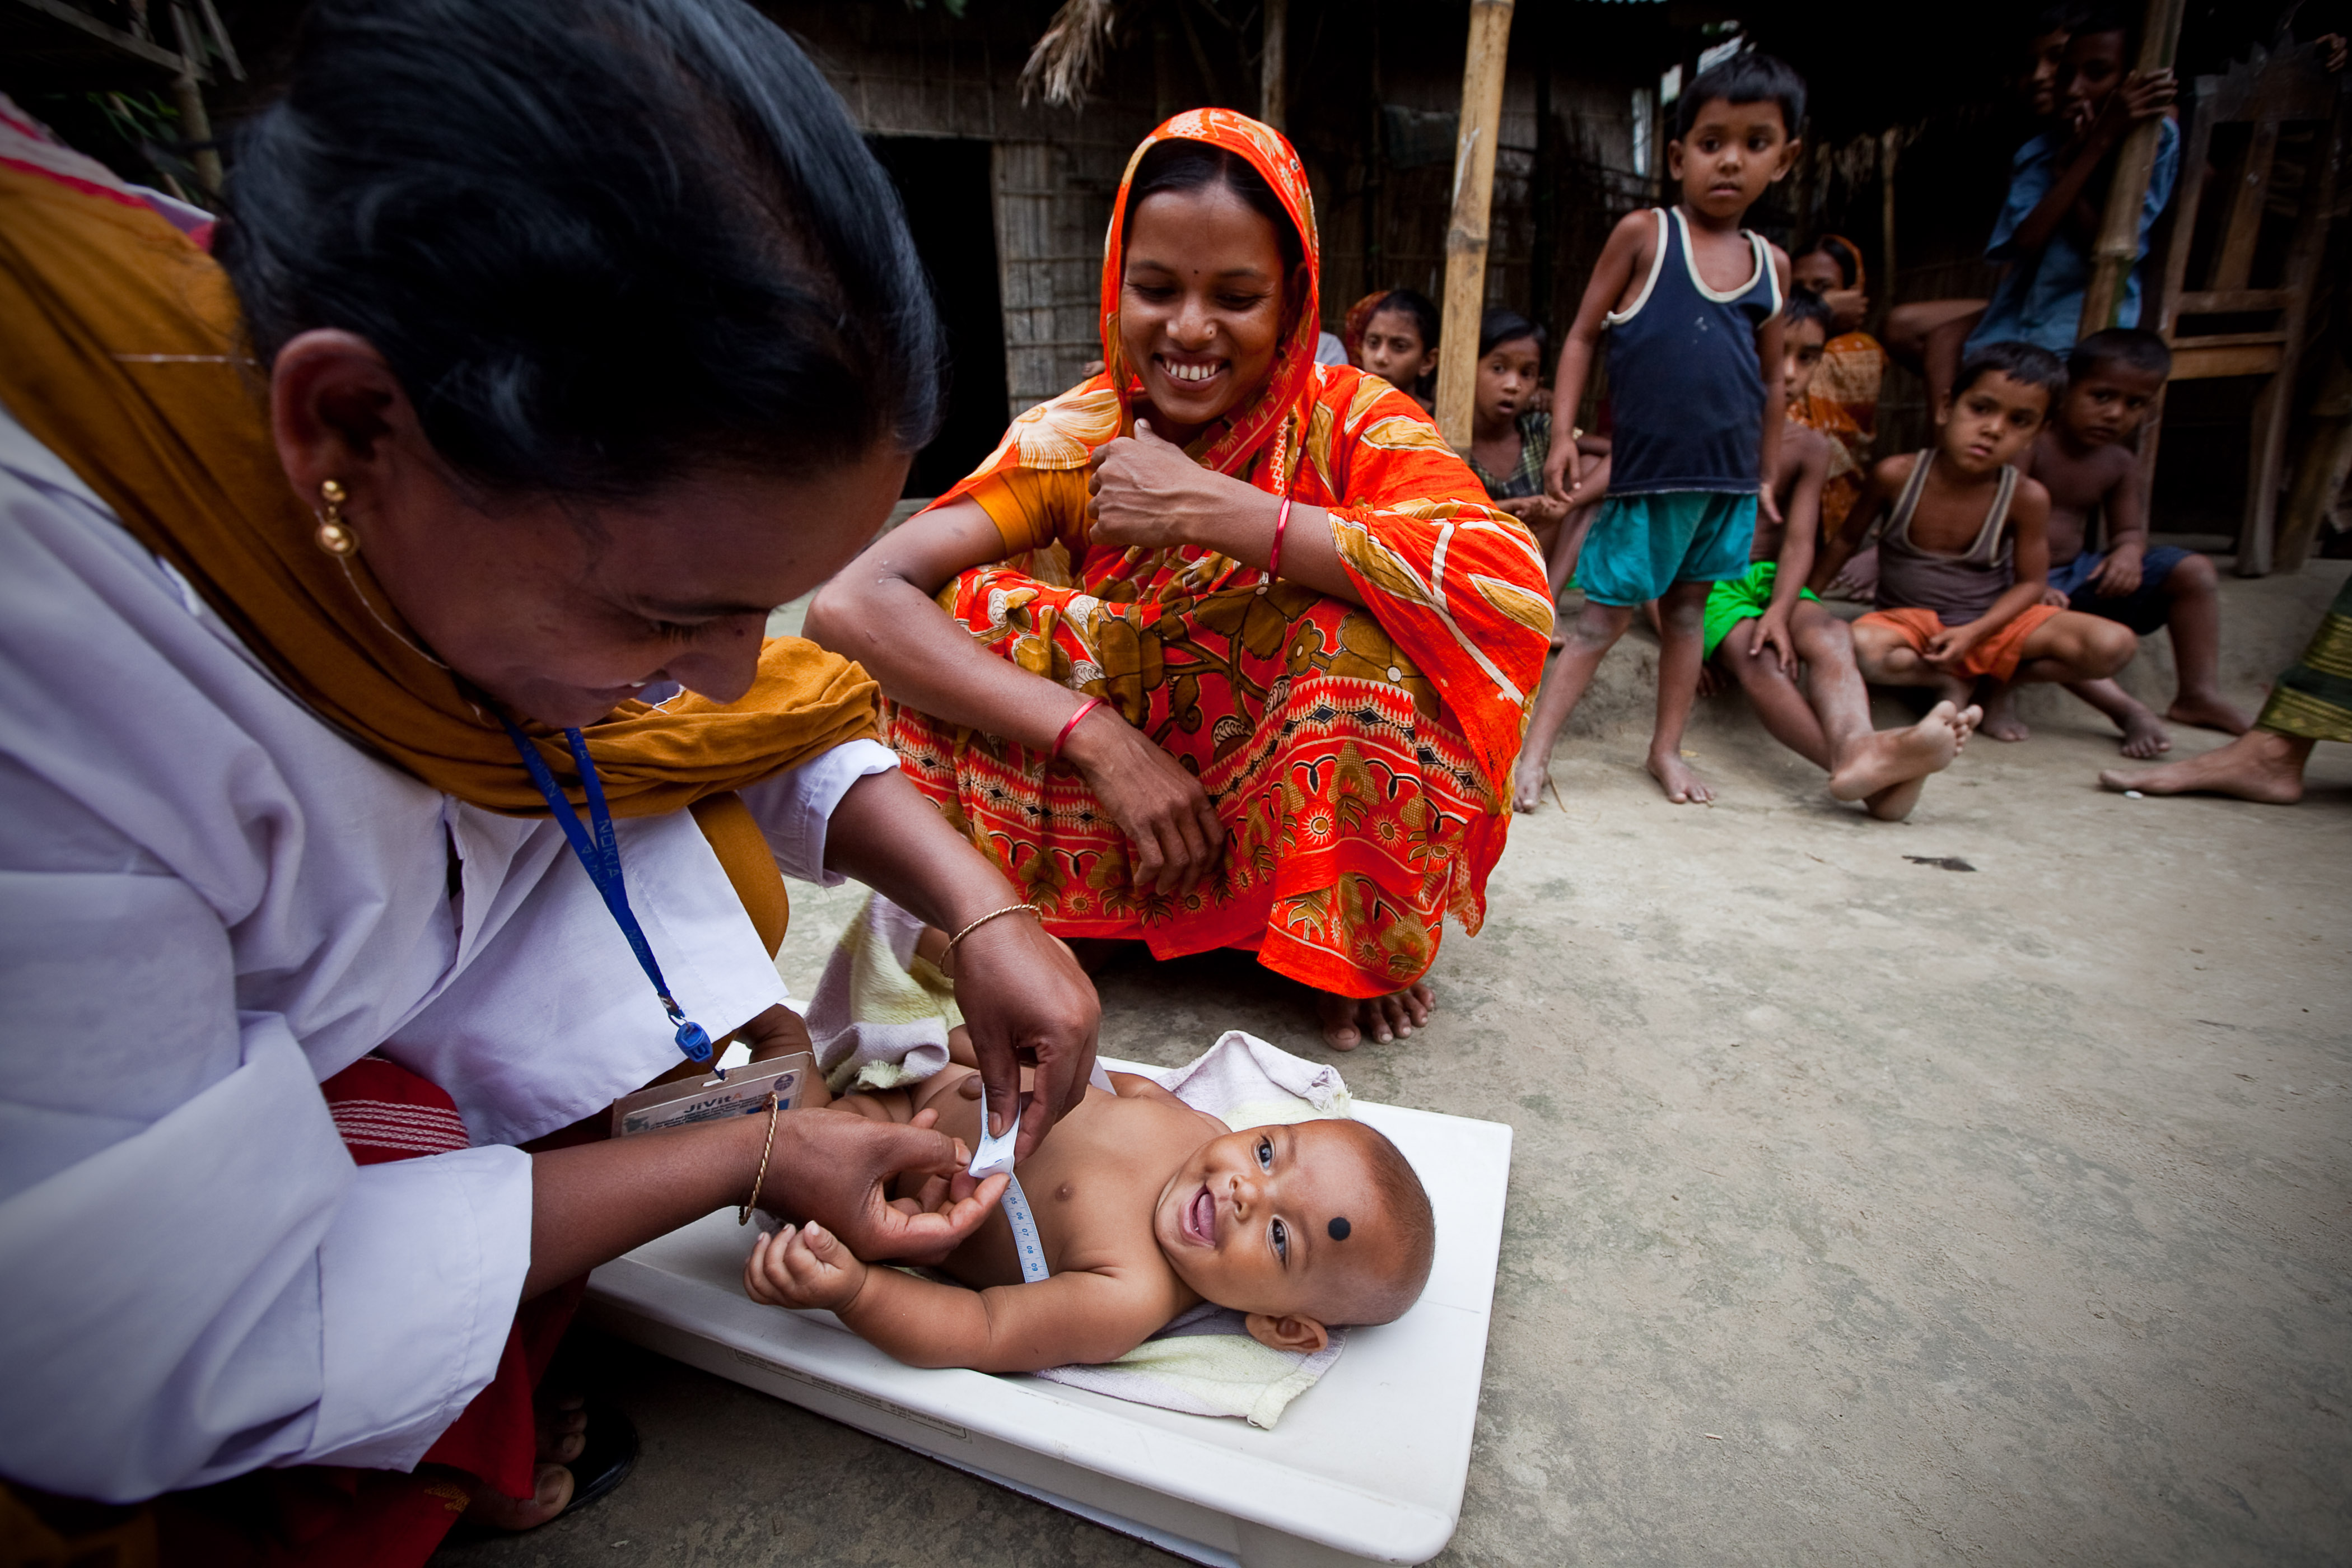 Bangladesh frontline health worker cares for baby